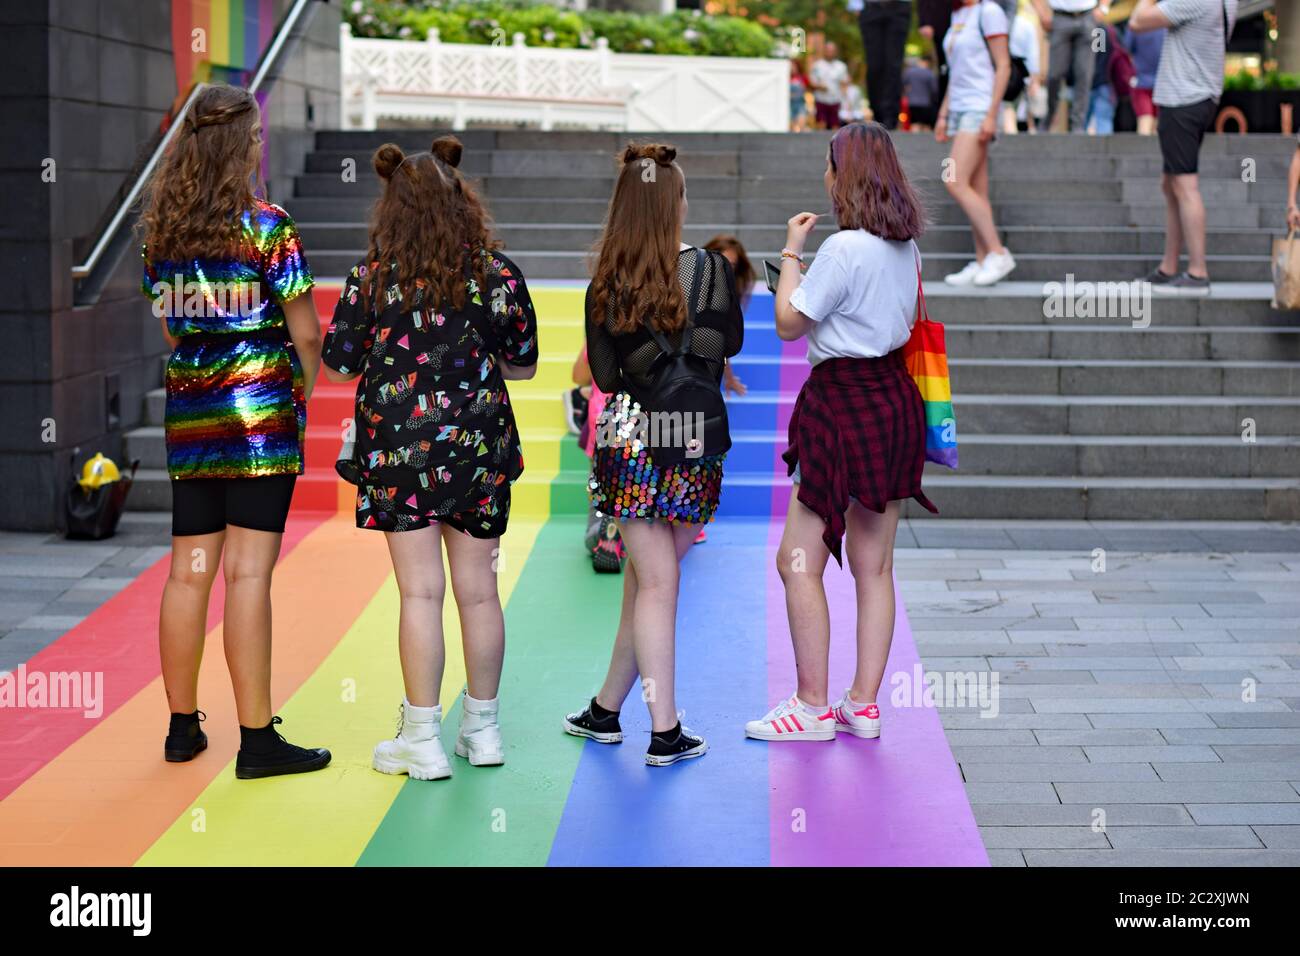 Four women standing on rainbow artwork painted floor on steps in Spinningfields Manchester during pride weekend Stock Photo